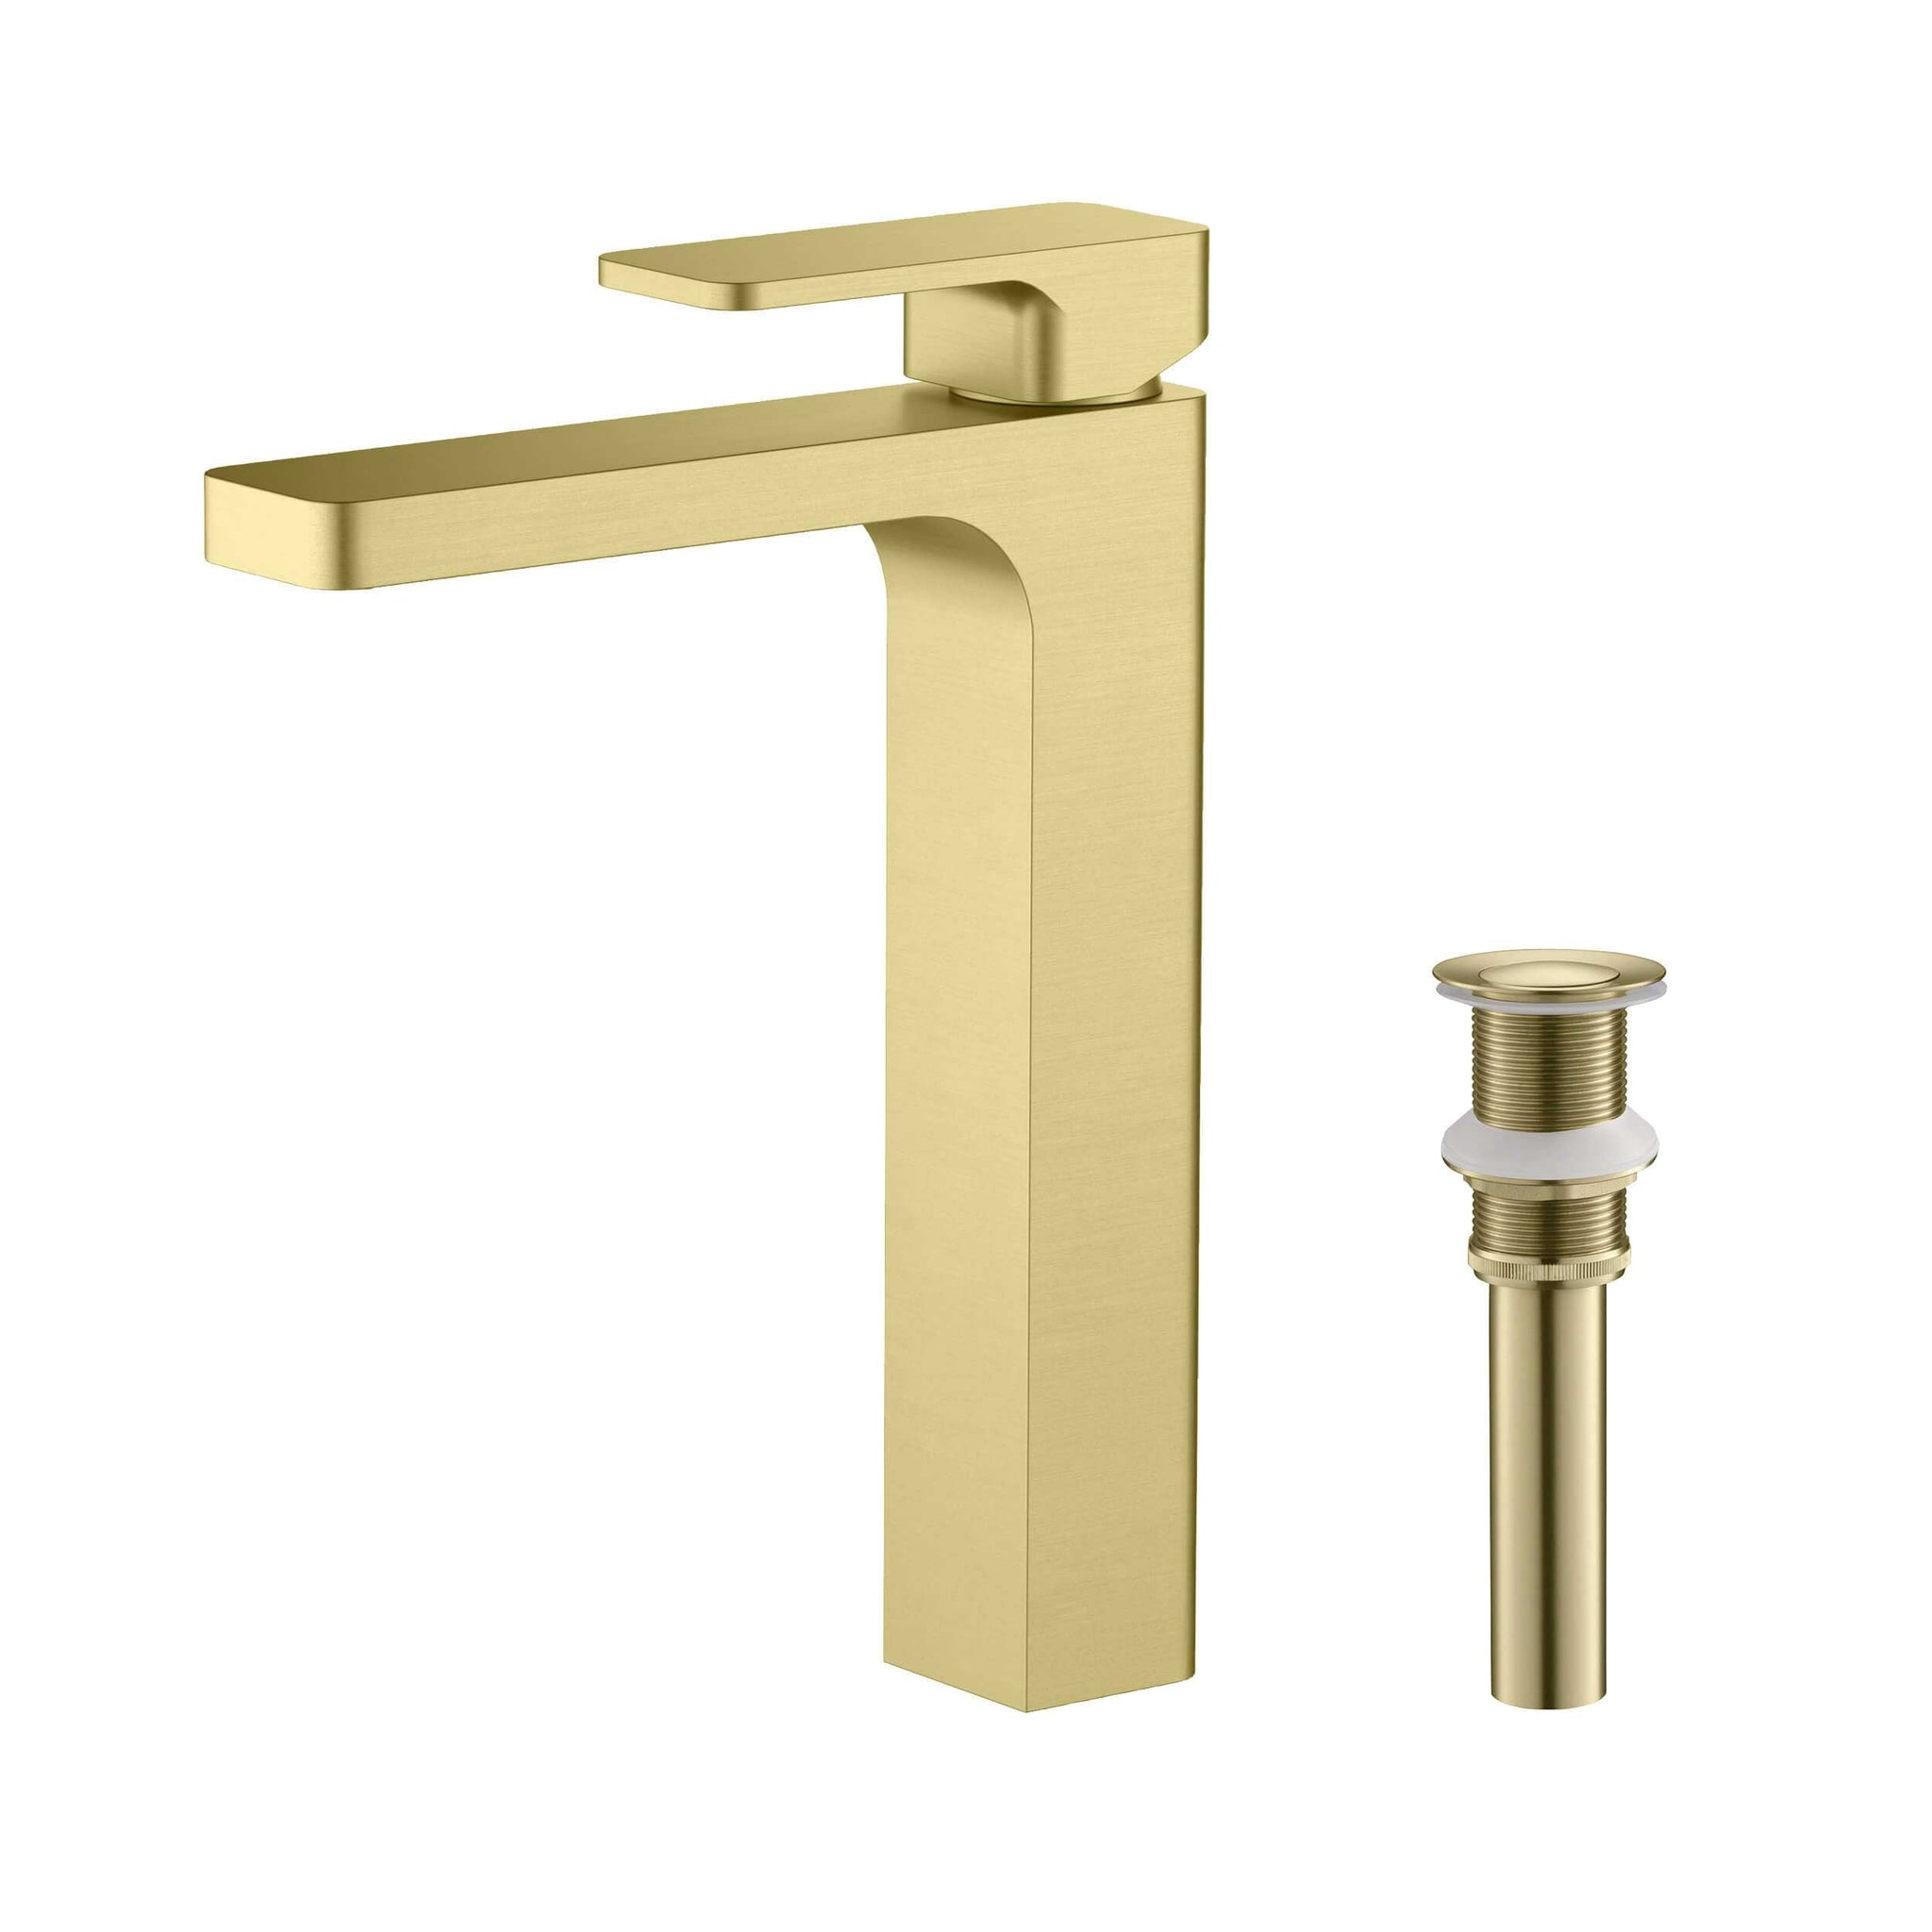 KIBI, KIBI Blaze-T Single Handle Brushed Gold Solid Brass Bathroom Vessel Sink Faucet With Pop-Up Drain Stopper Small Cover Without Overflow